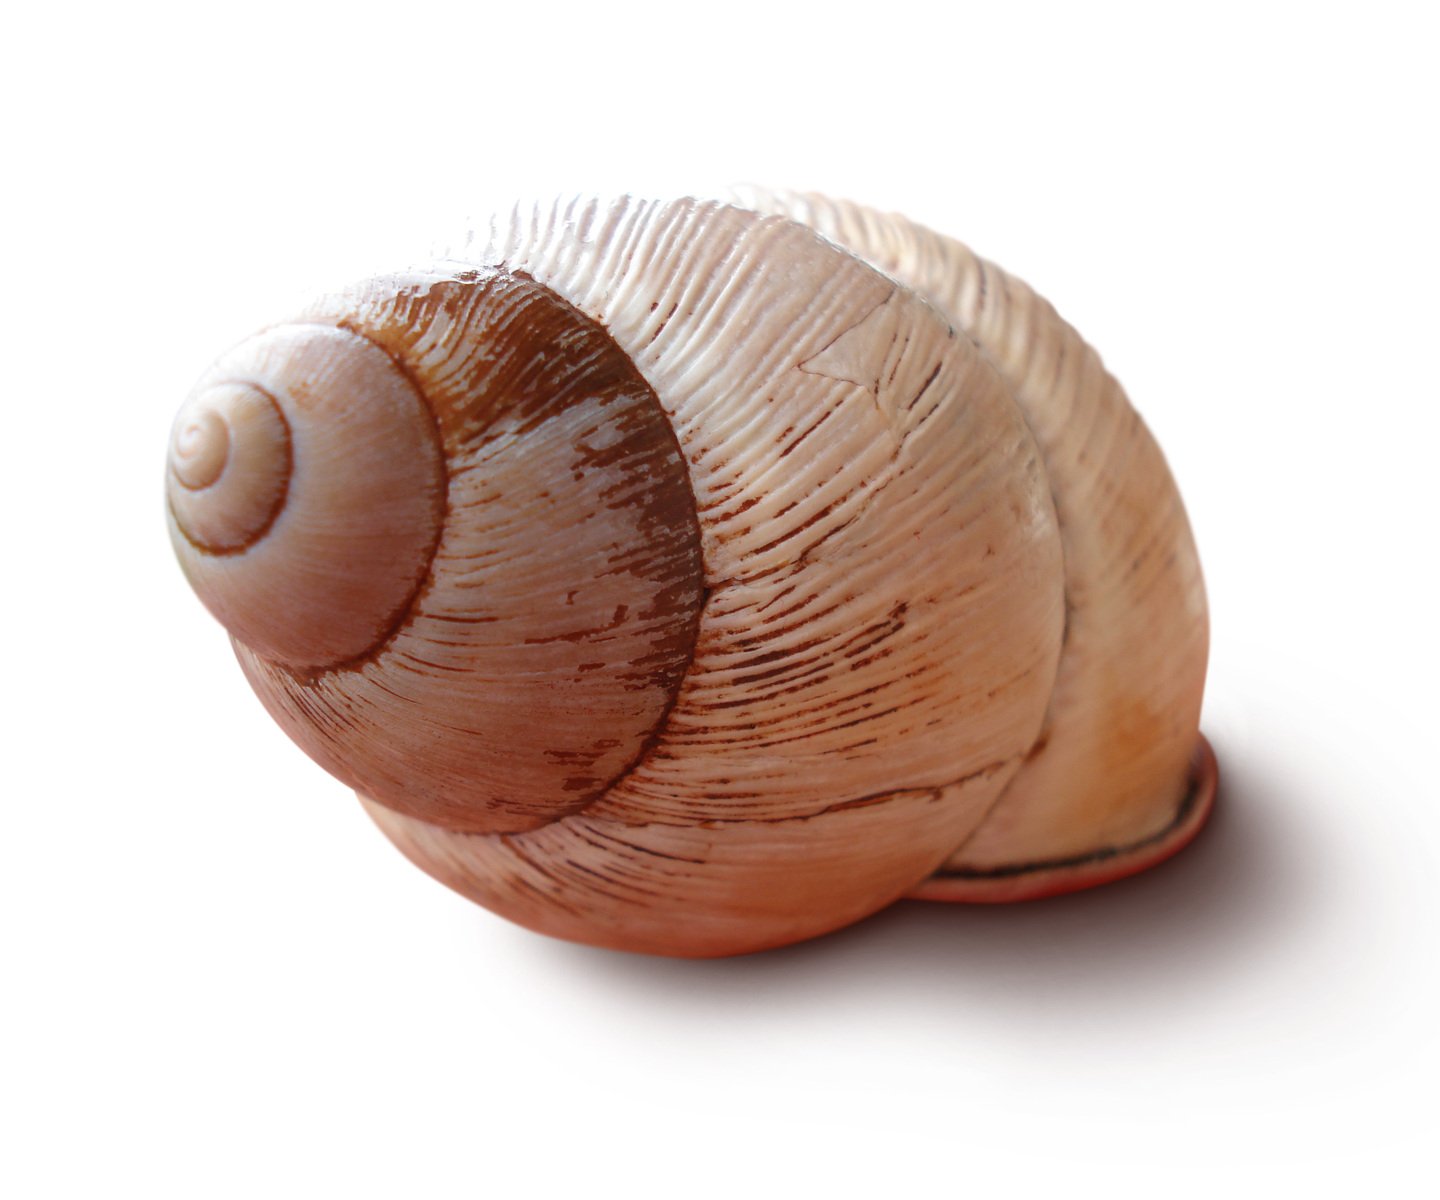 the underside of a snail is pographed against a white background